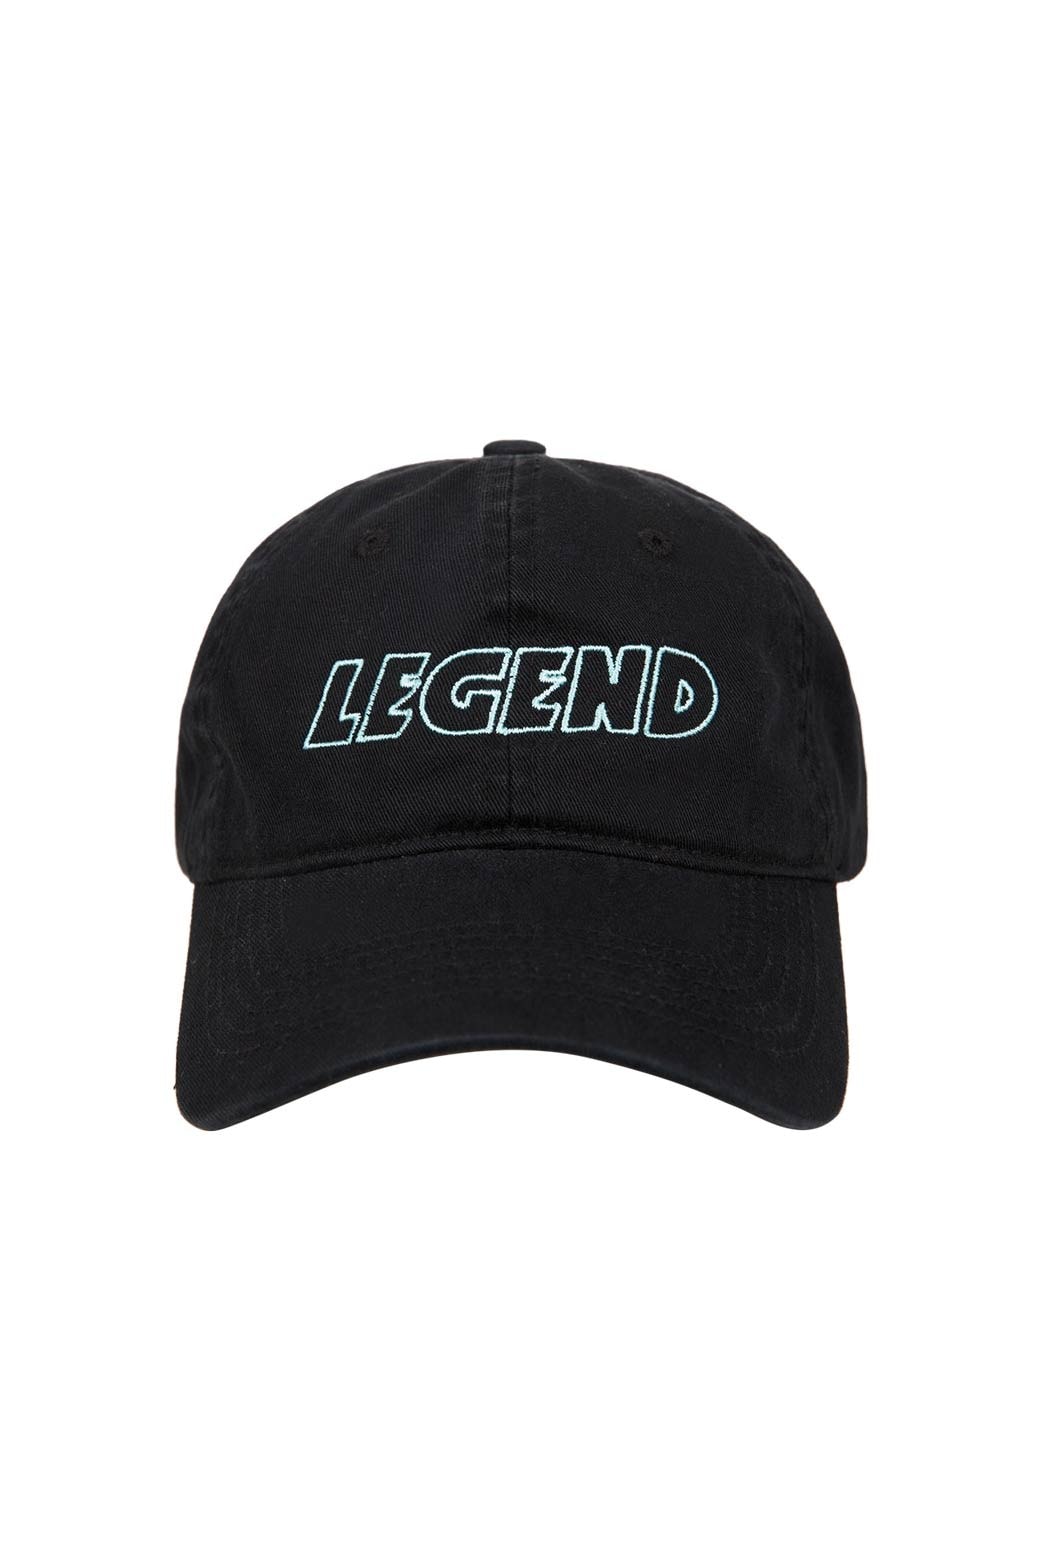 The Weeknd Starboy Legend of the Fall Phase Two Merch